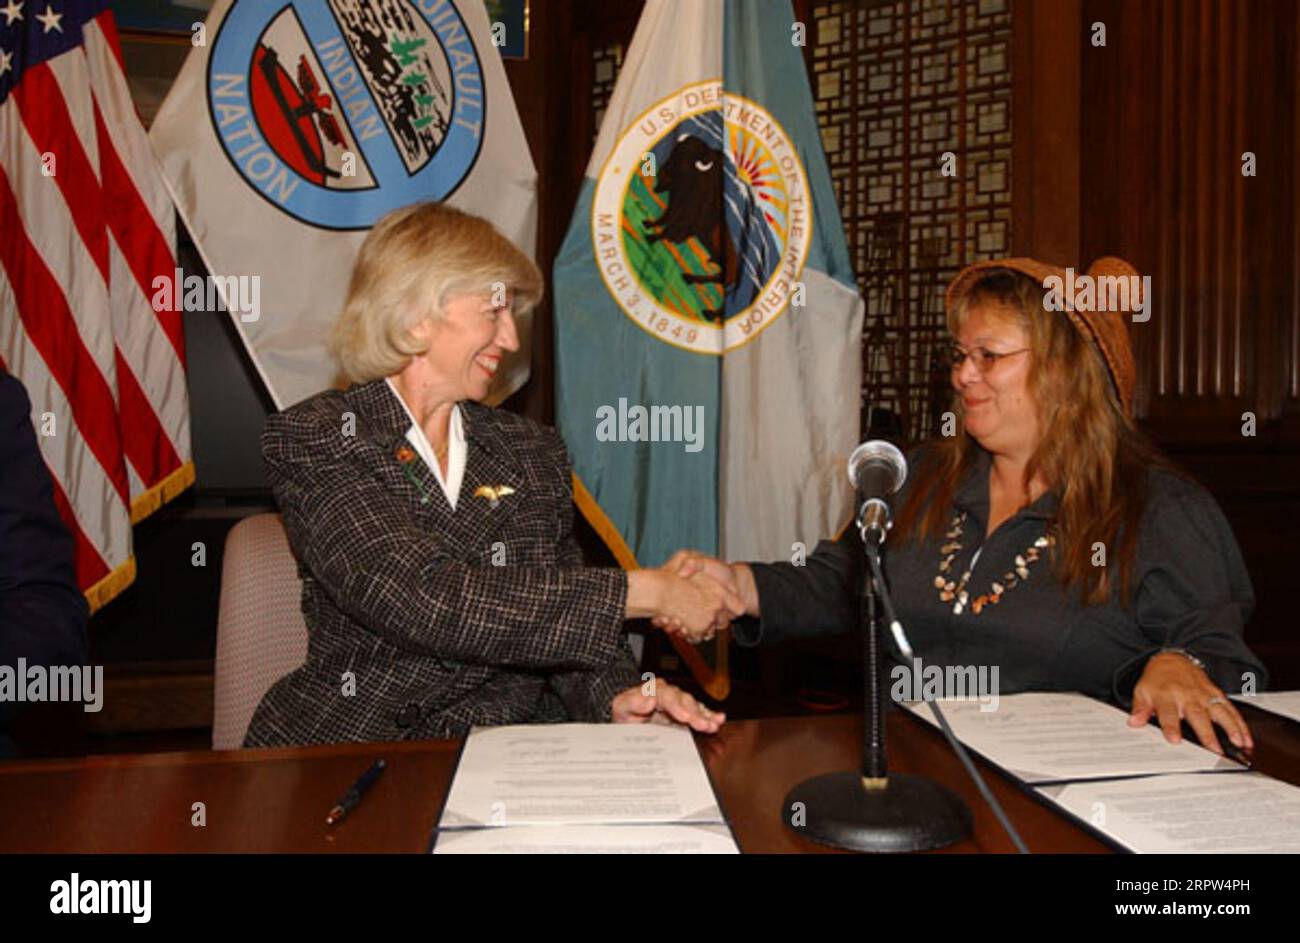 Secretary Gale Norton with the President of the Quinault Indian Nation, Pearl Capoeman-Baller, left to right, at Department of Interior headquarters signing event for agreement protecting forest habitat of marbled murrelet and other species on Quinault Reservation land in Washington state Stock Photo